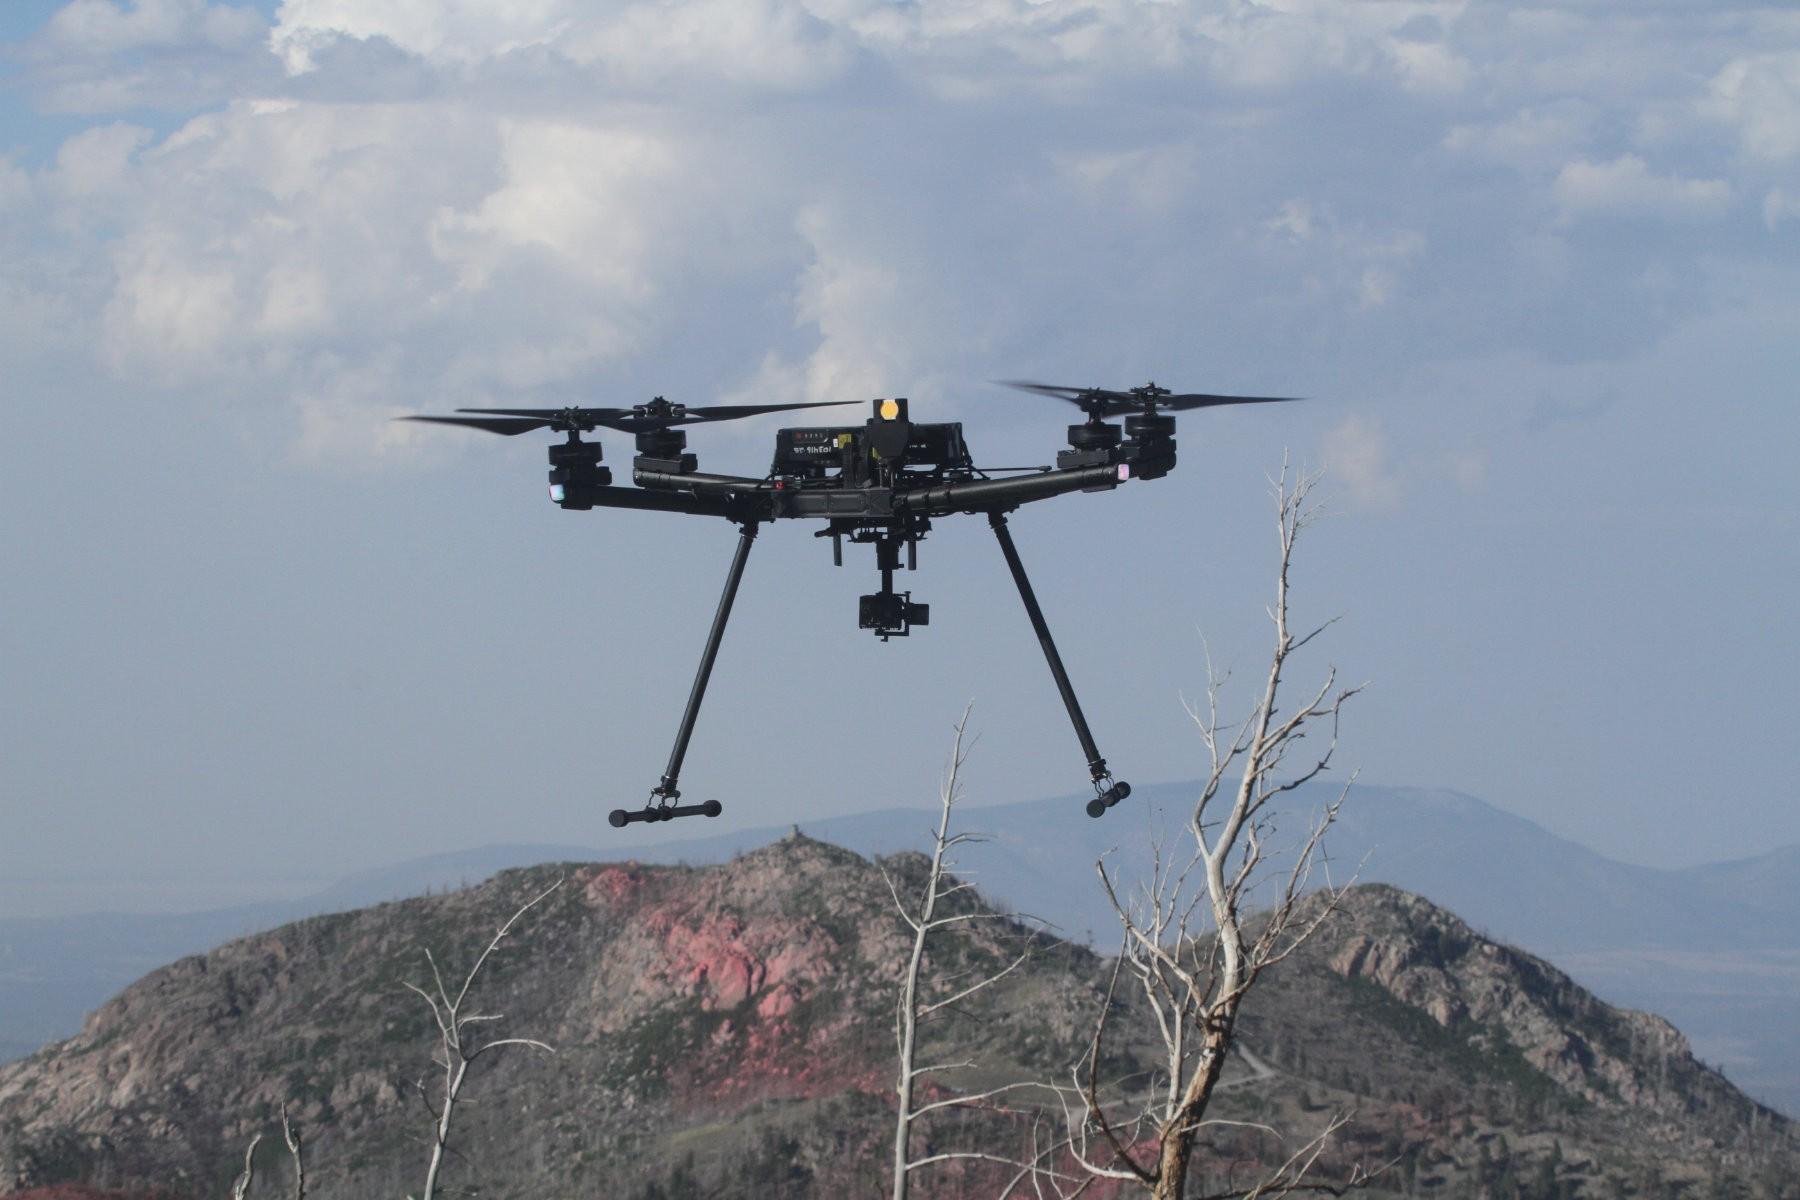 Drone launched to conduct Infrared flights to help find hot spots in the fire area of the Blue 2 Fire. 